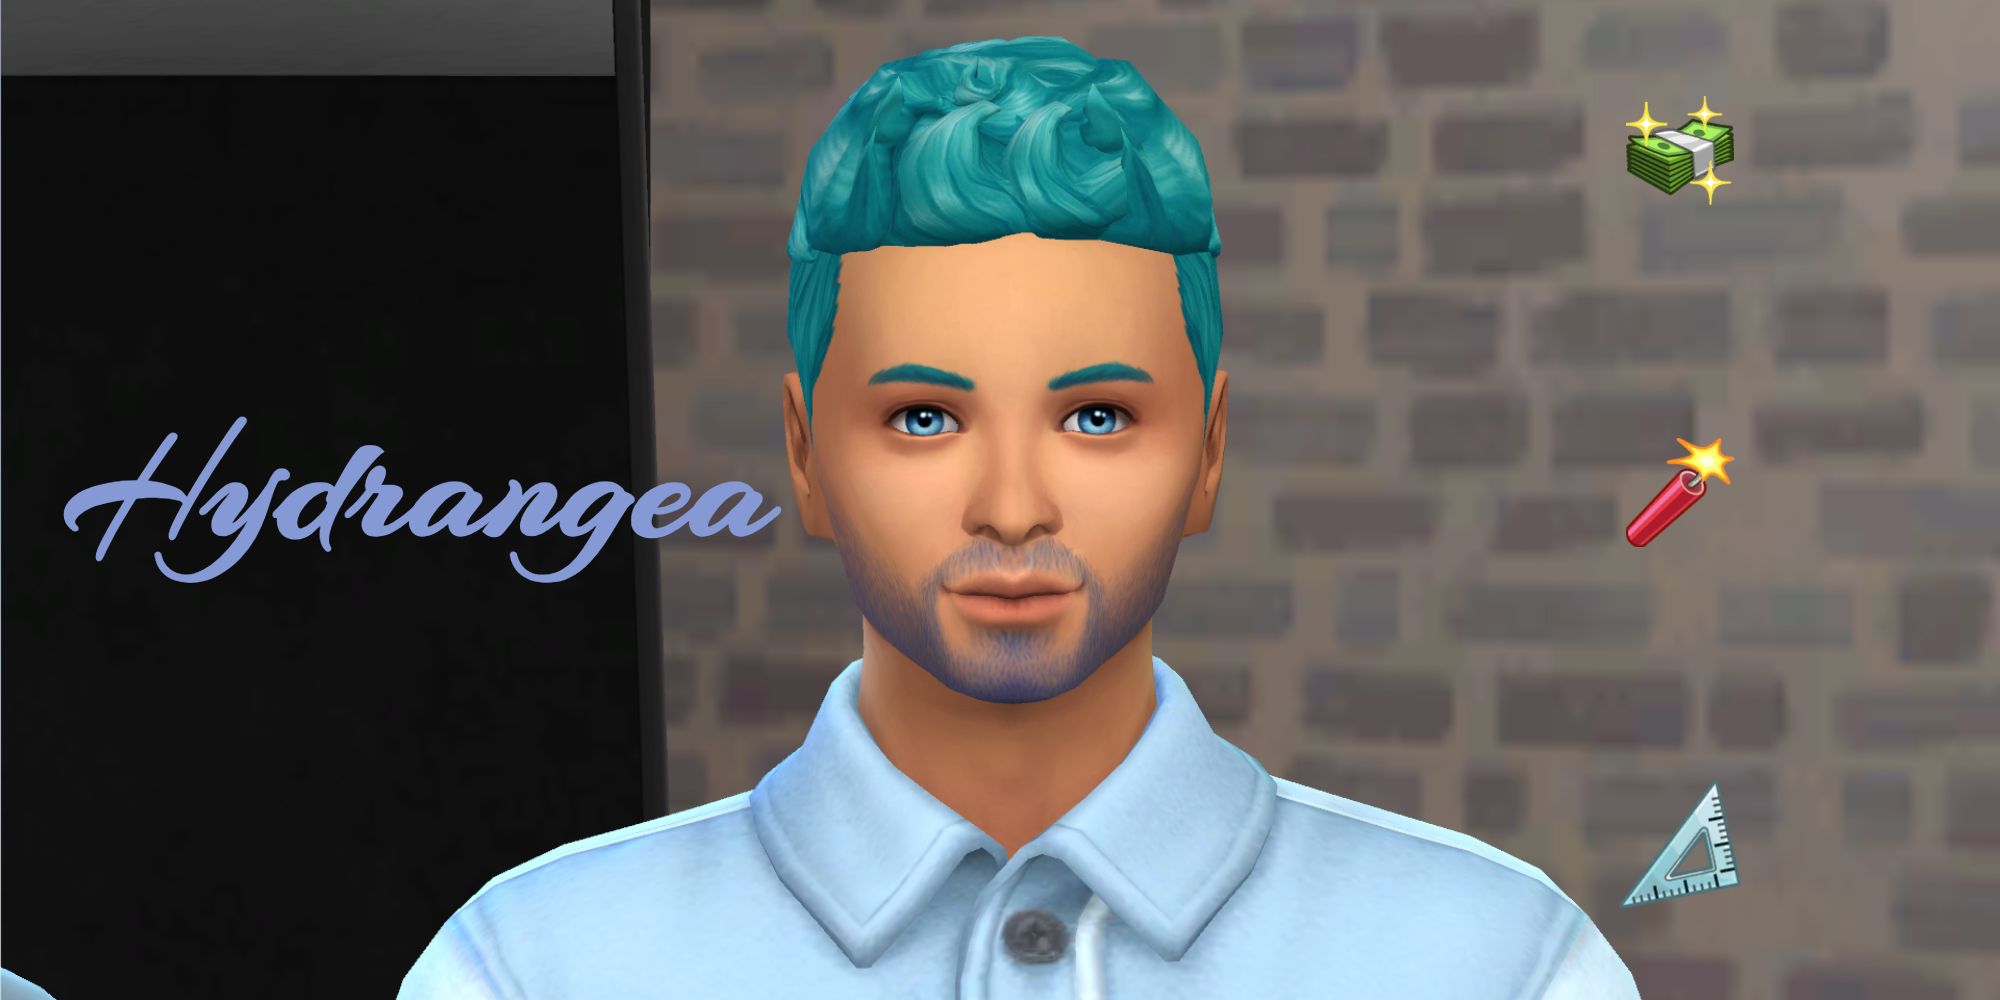 A blue-haired Sim from the hydrangea generation